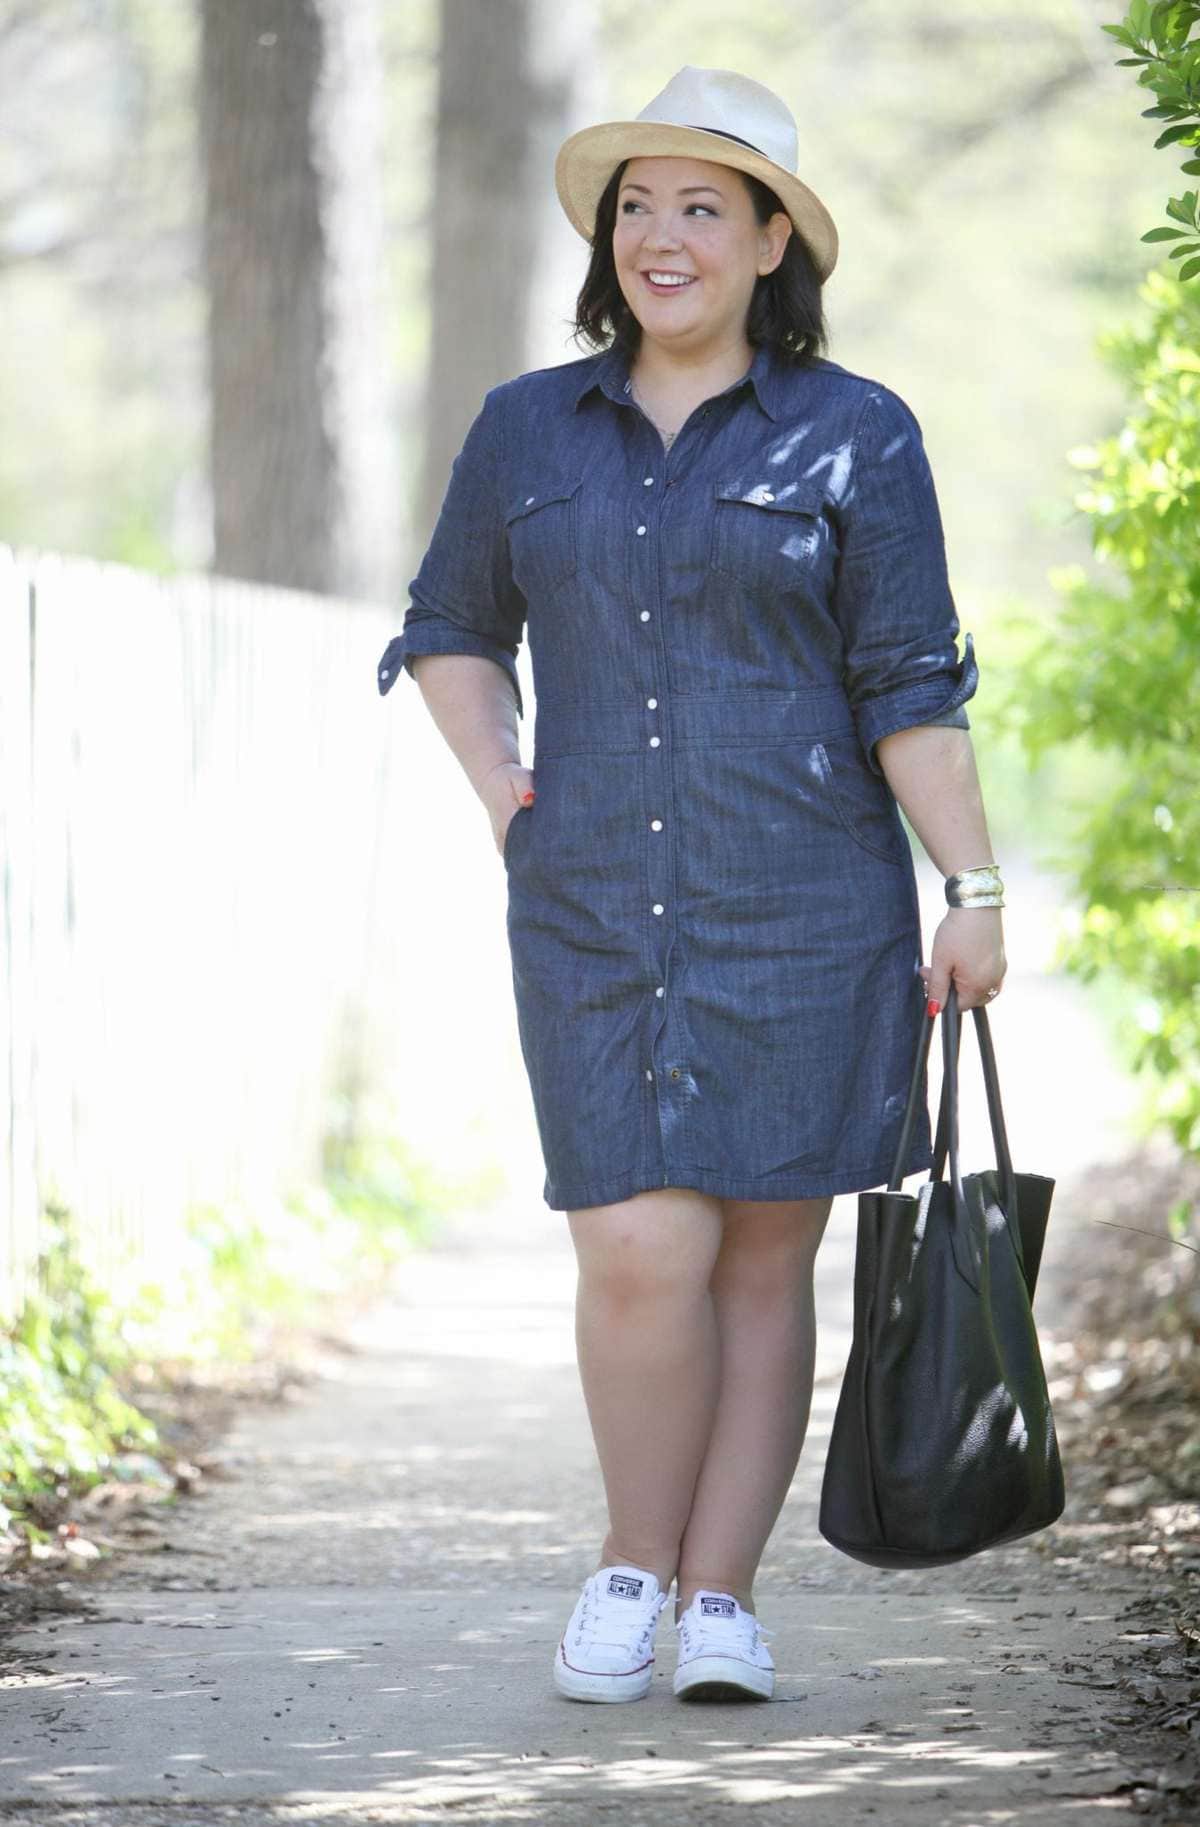 Over 40 fashion blog Wardrobe Oxygen in a Boden dress, Converse sneakers, and carrying an Adora Bags tote